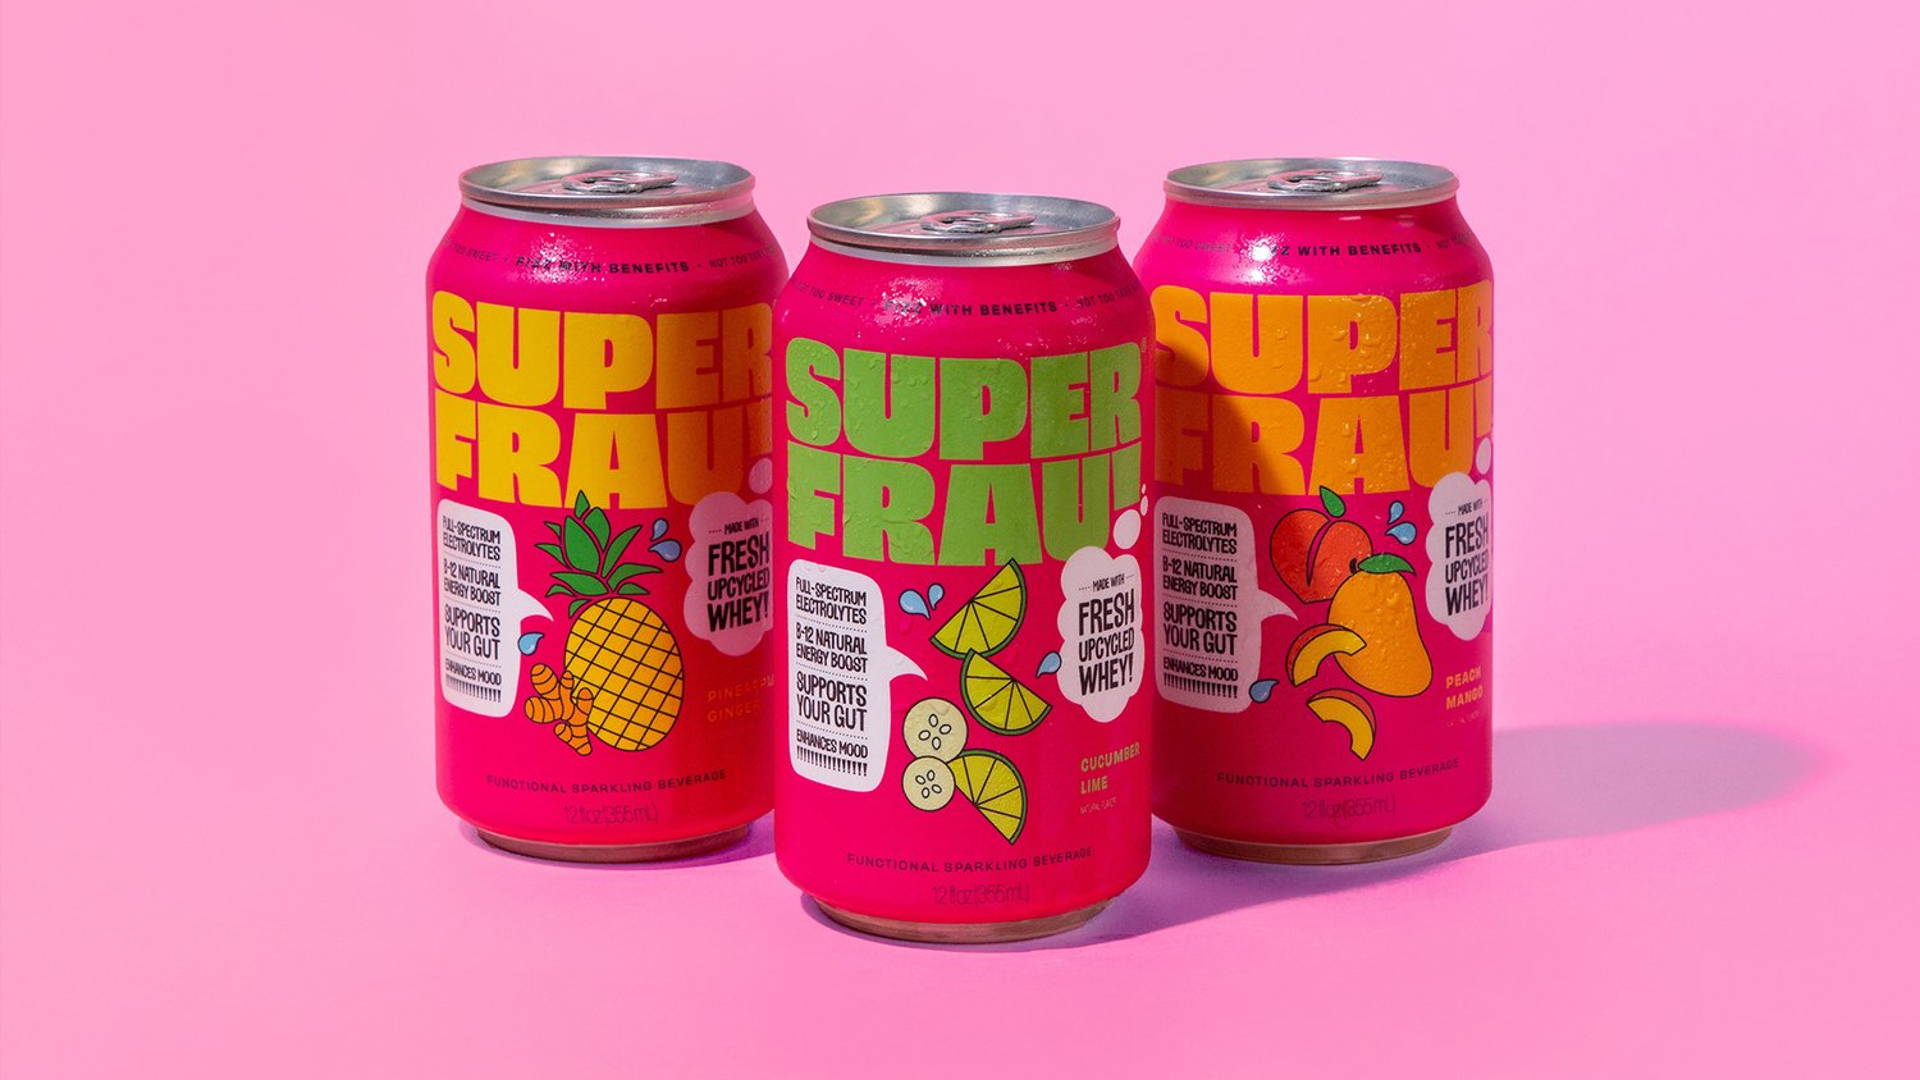 Featured image for Superfrau Is a Liquid Whey Drink With Superheroine Branding By Fenomenal